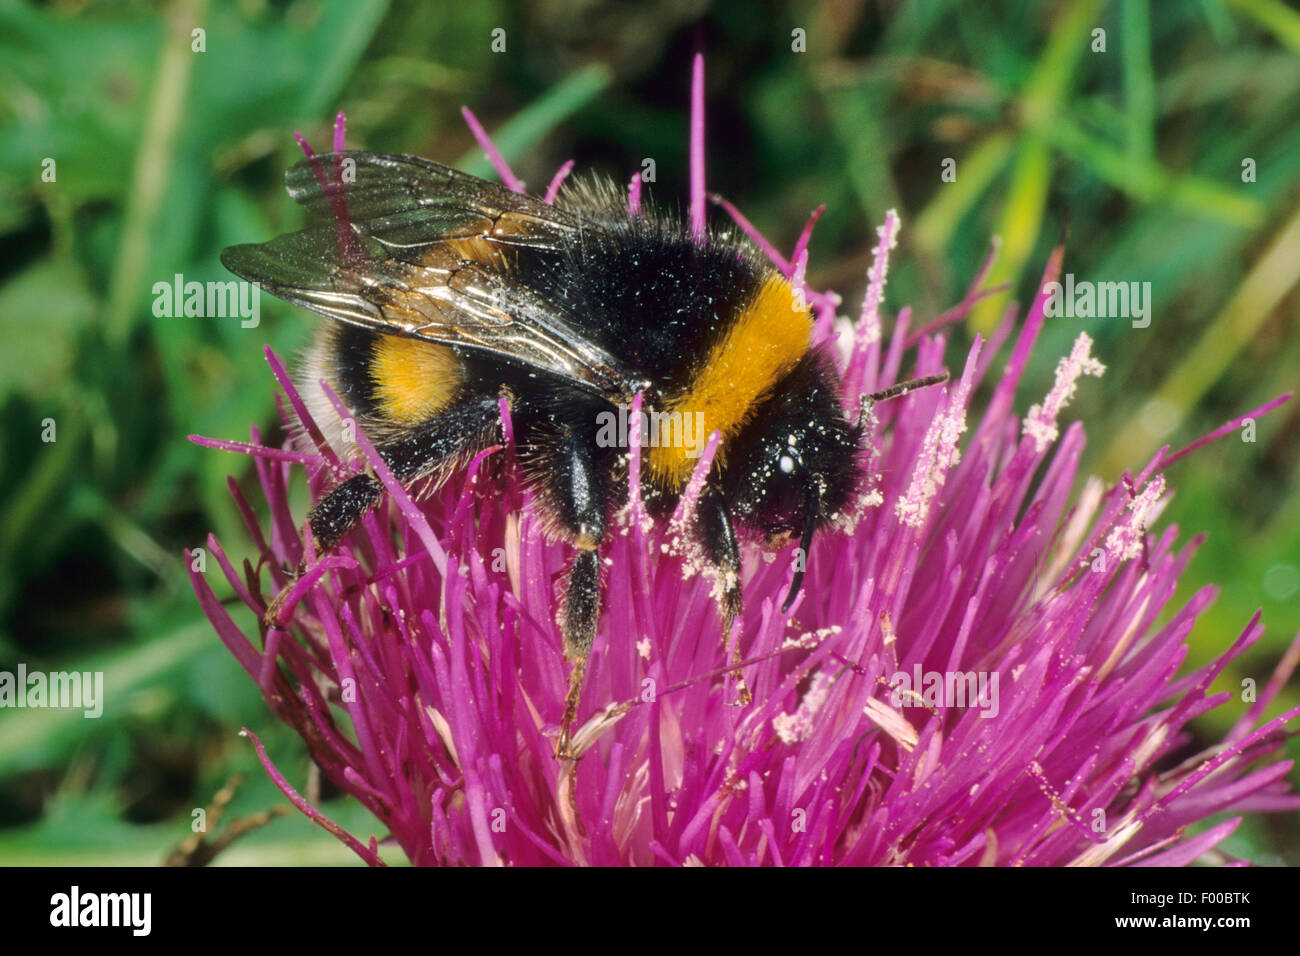 buff-tailed bumble bee (Bombus terrestris), on a flower, Germany Stock Photo